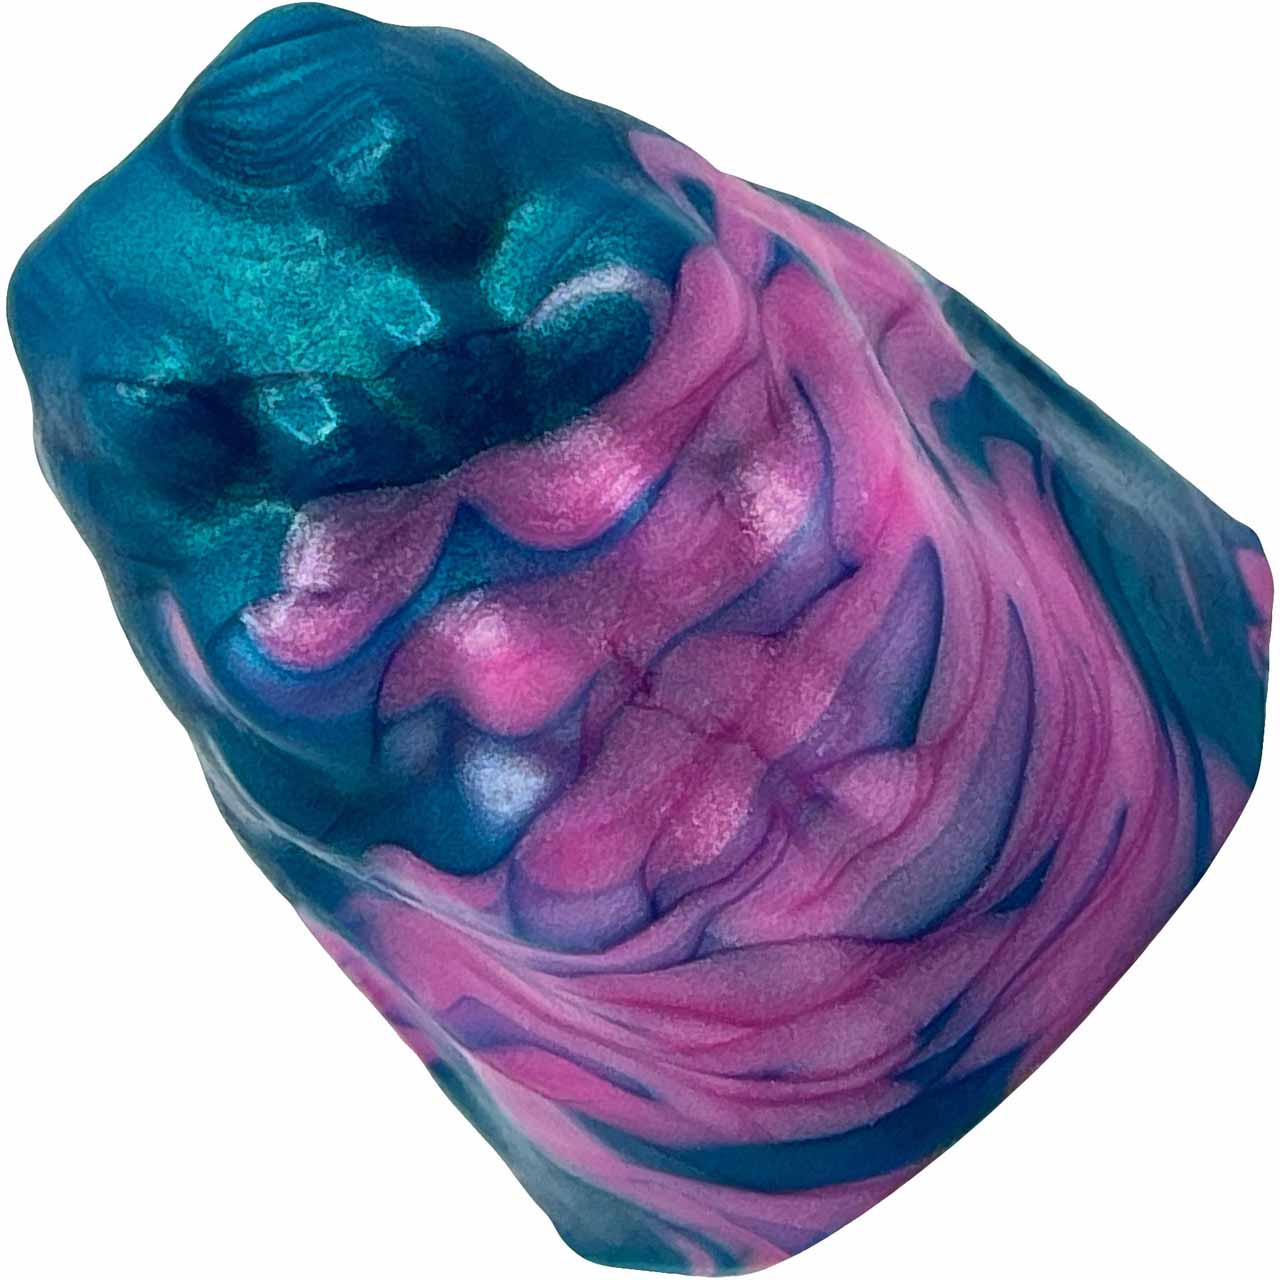 The back of the Pearl Pink & Mermaid Blue Fingo Grinder.